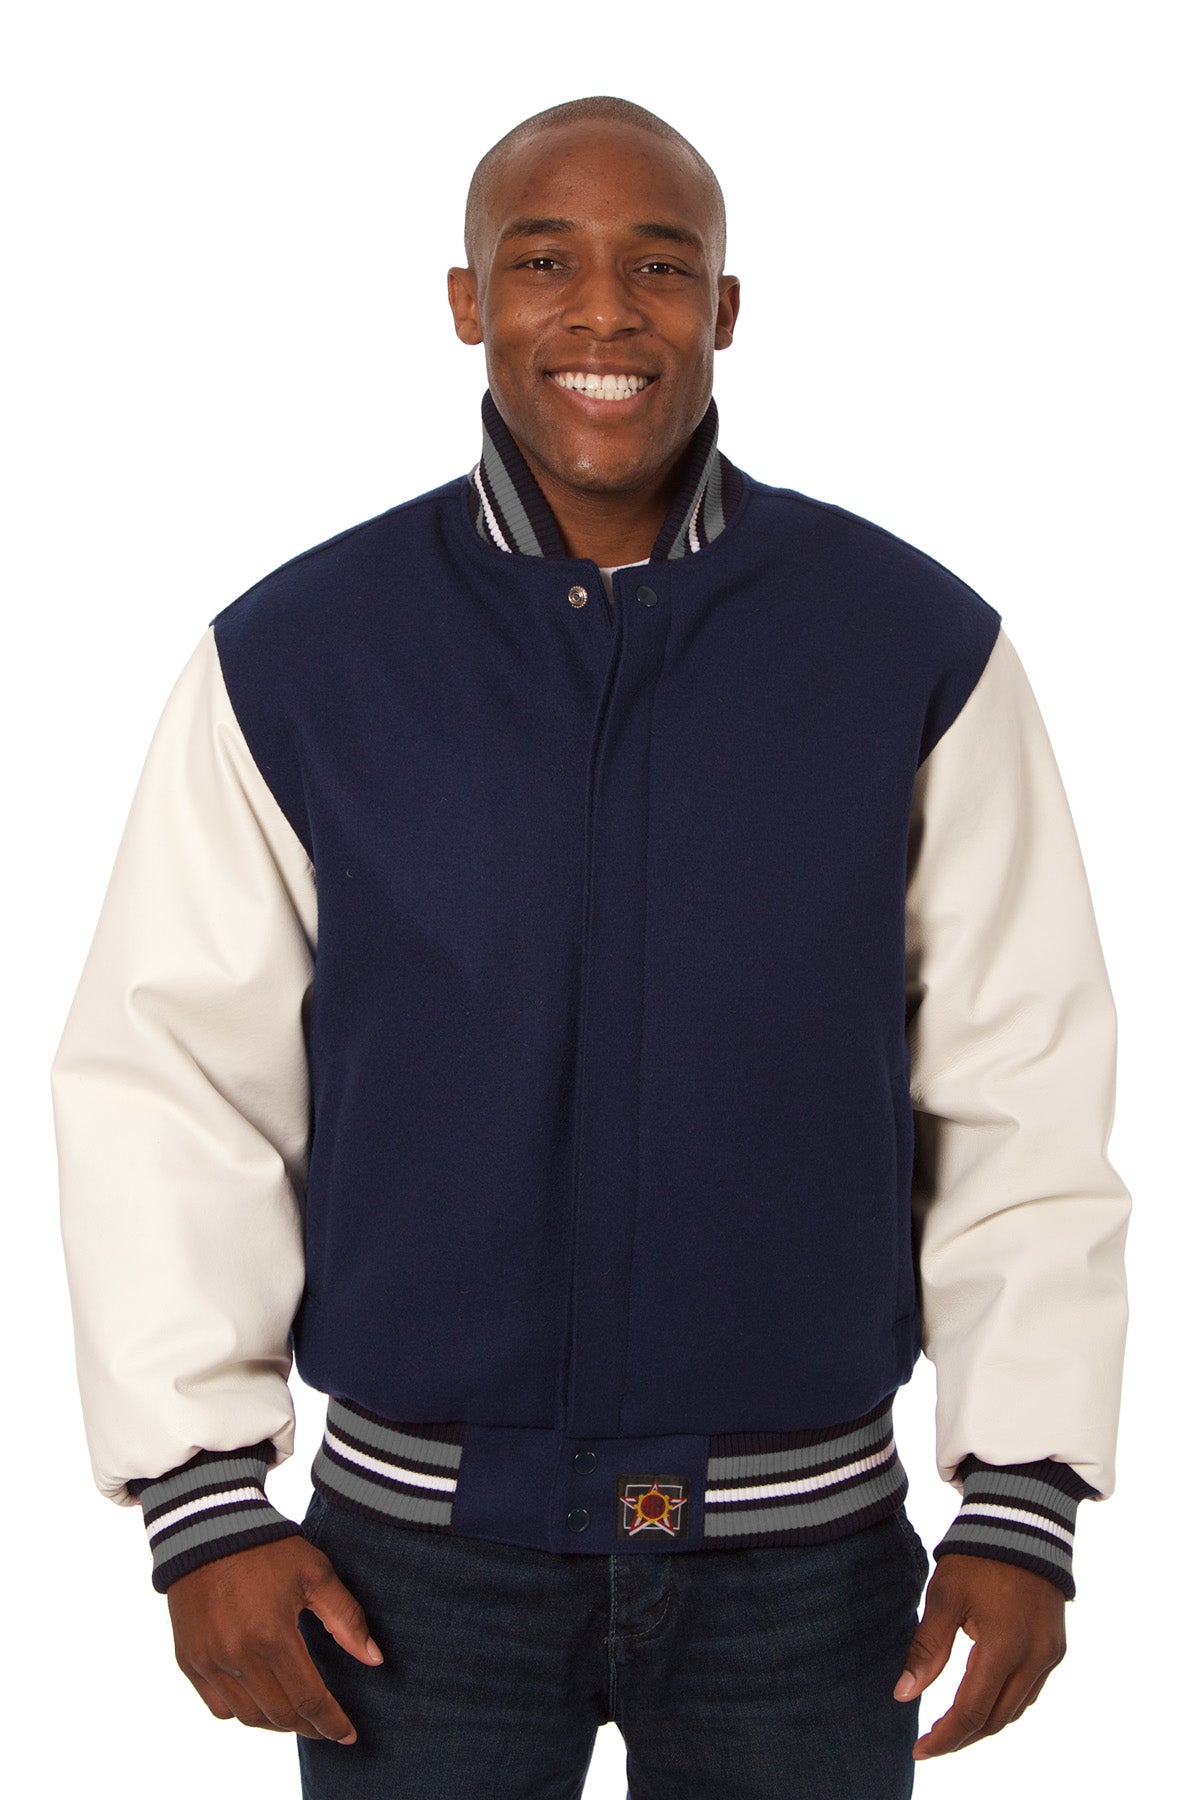 Wool and Leather Varsity Jacket in Navy and White